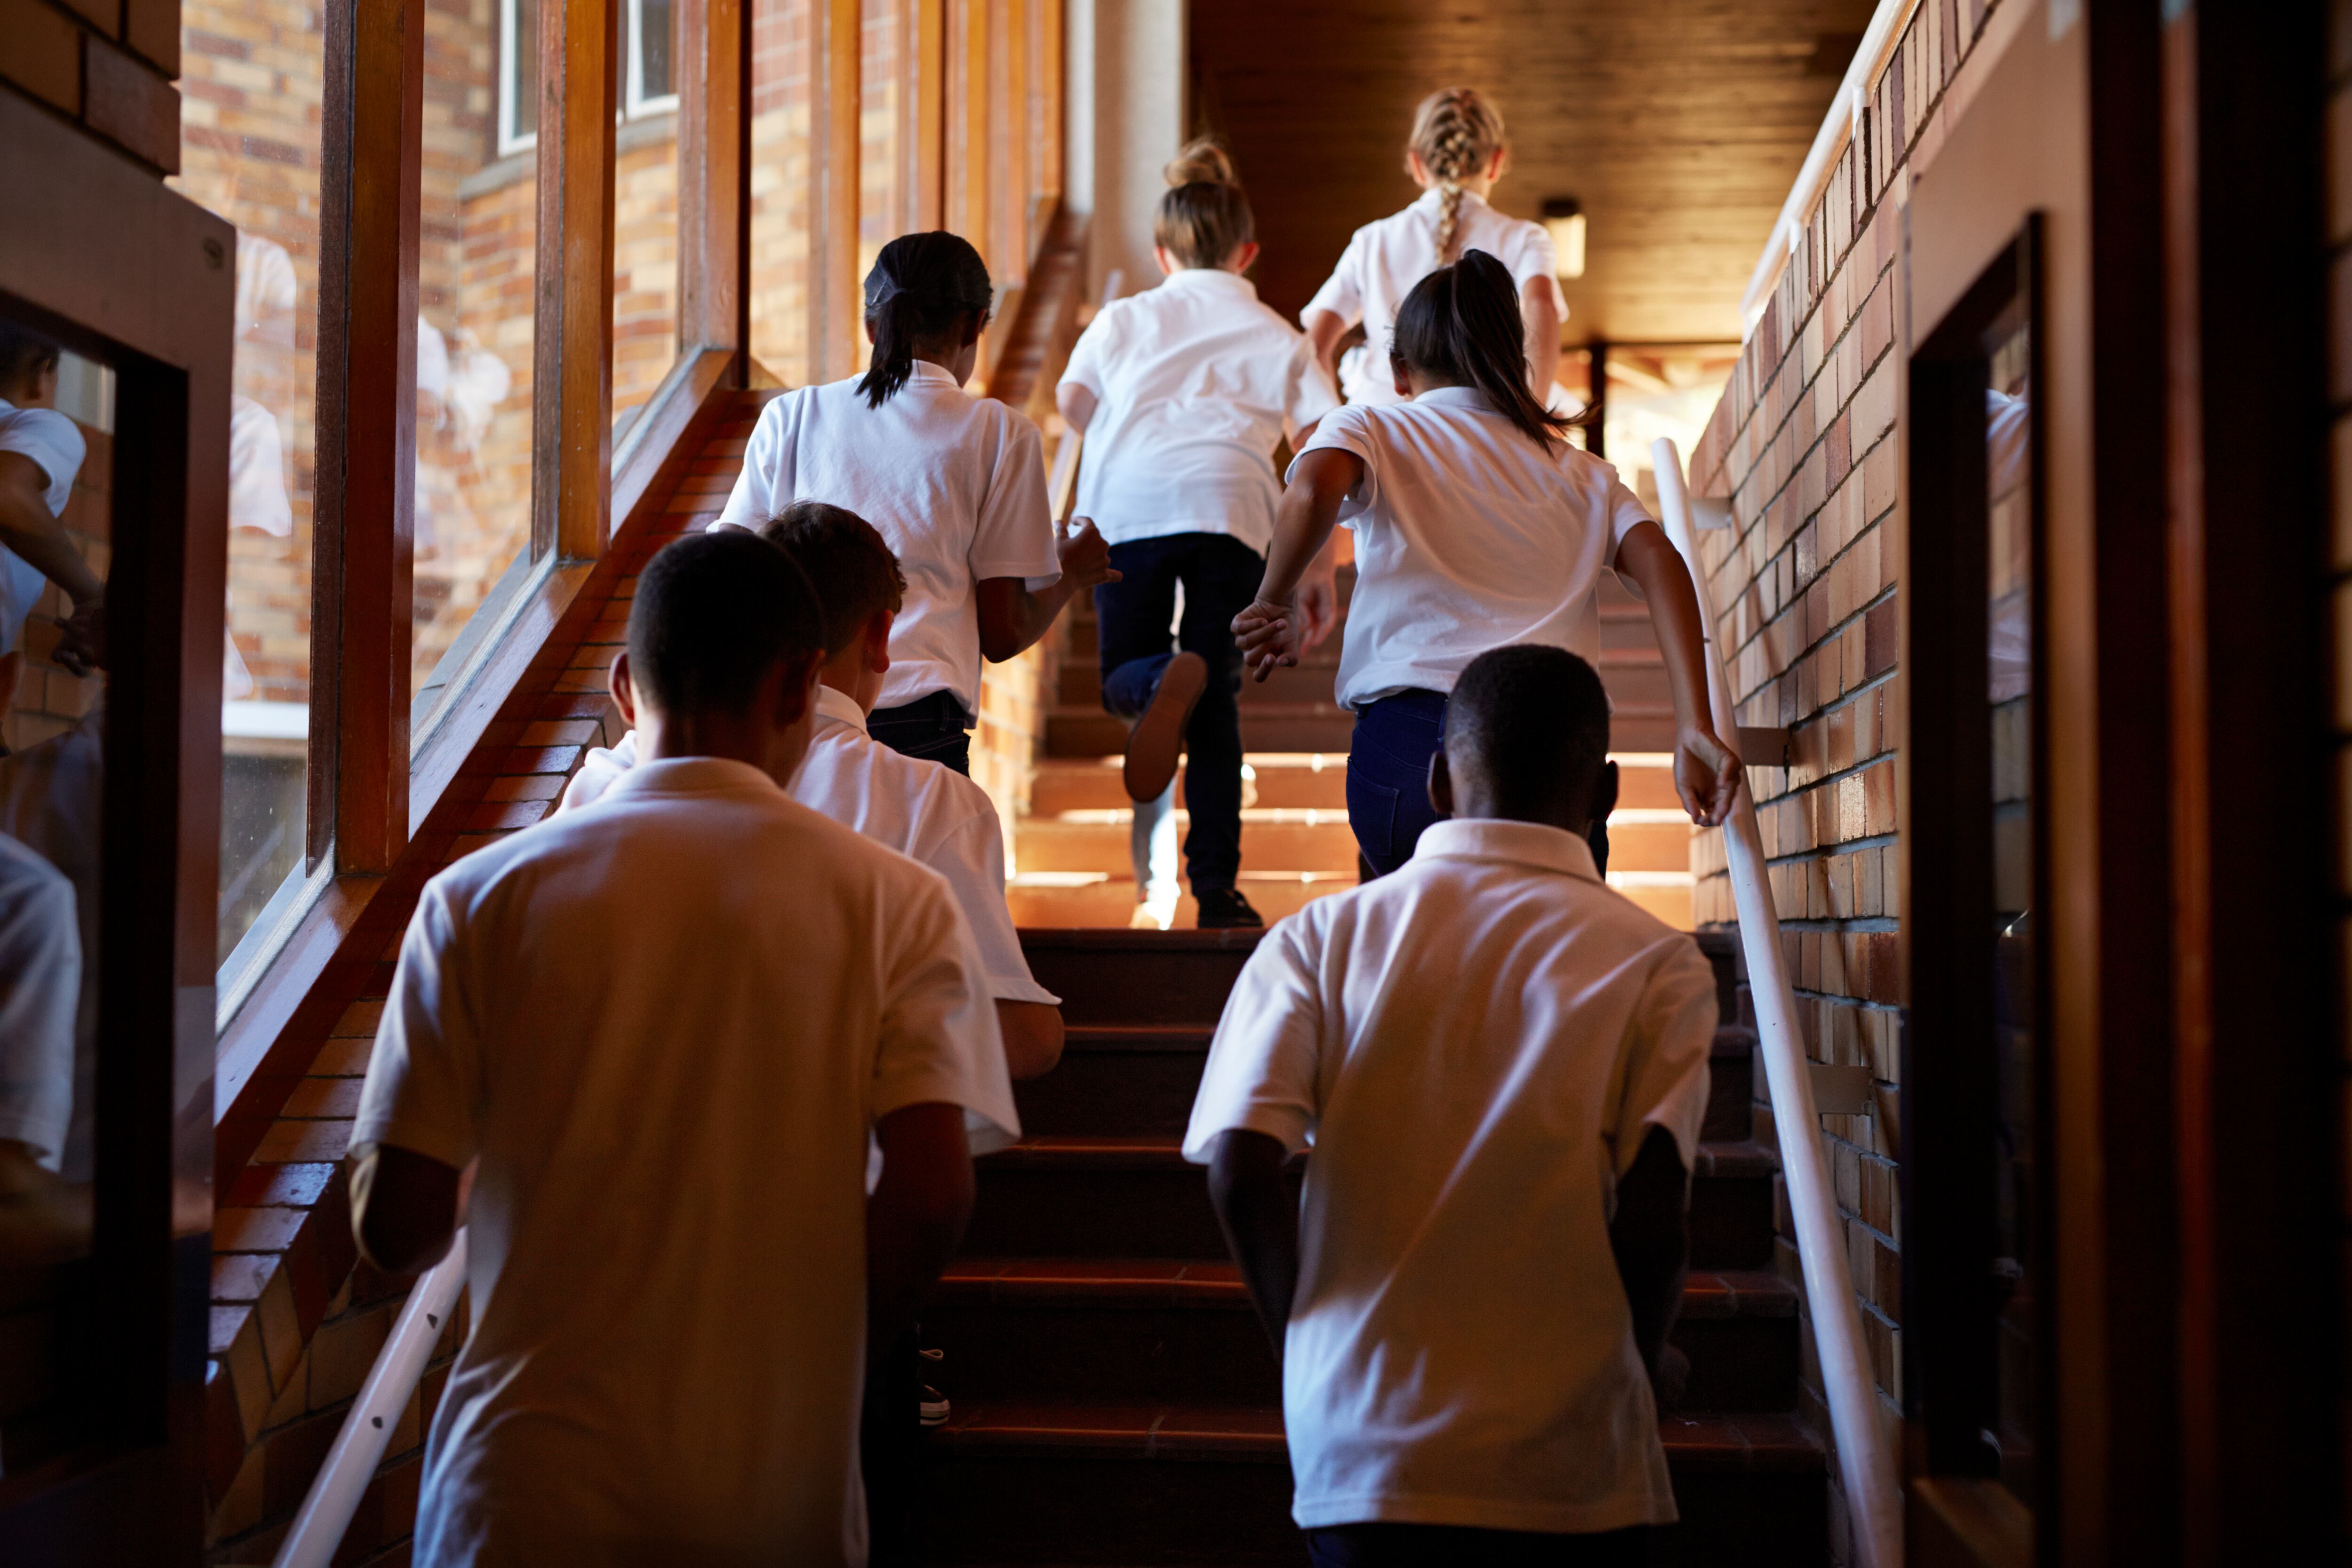 A group of seven students wearing white shirts as part of a uniform run up the stairs in a school.